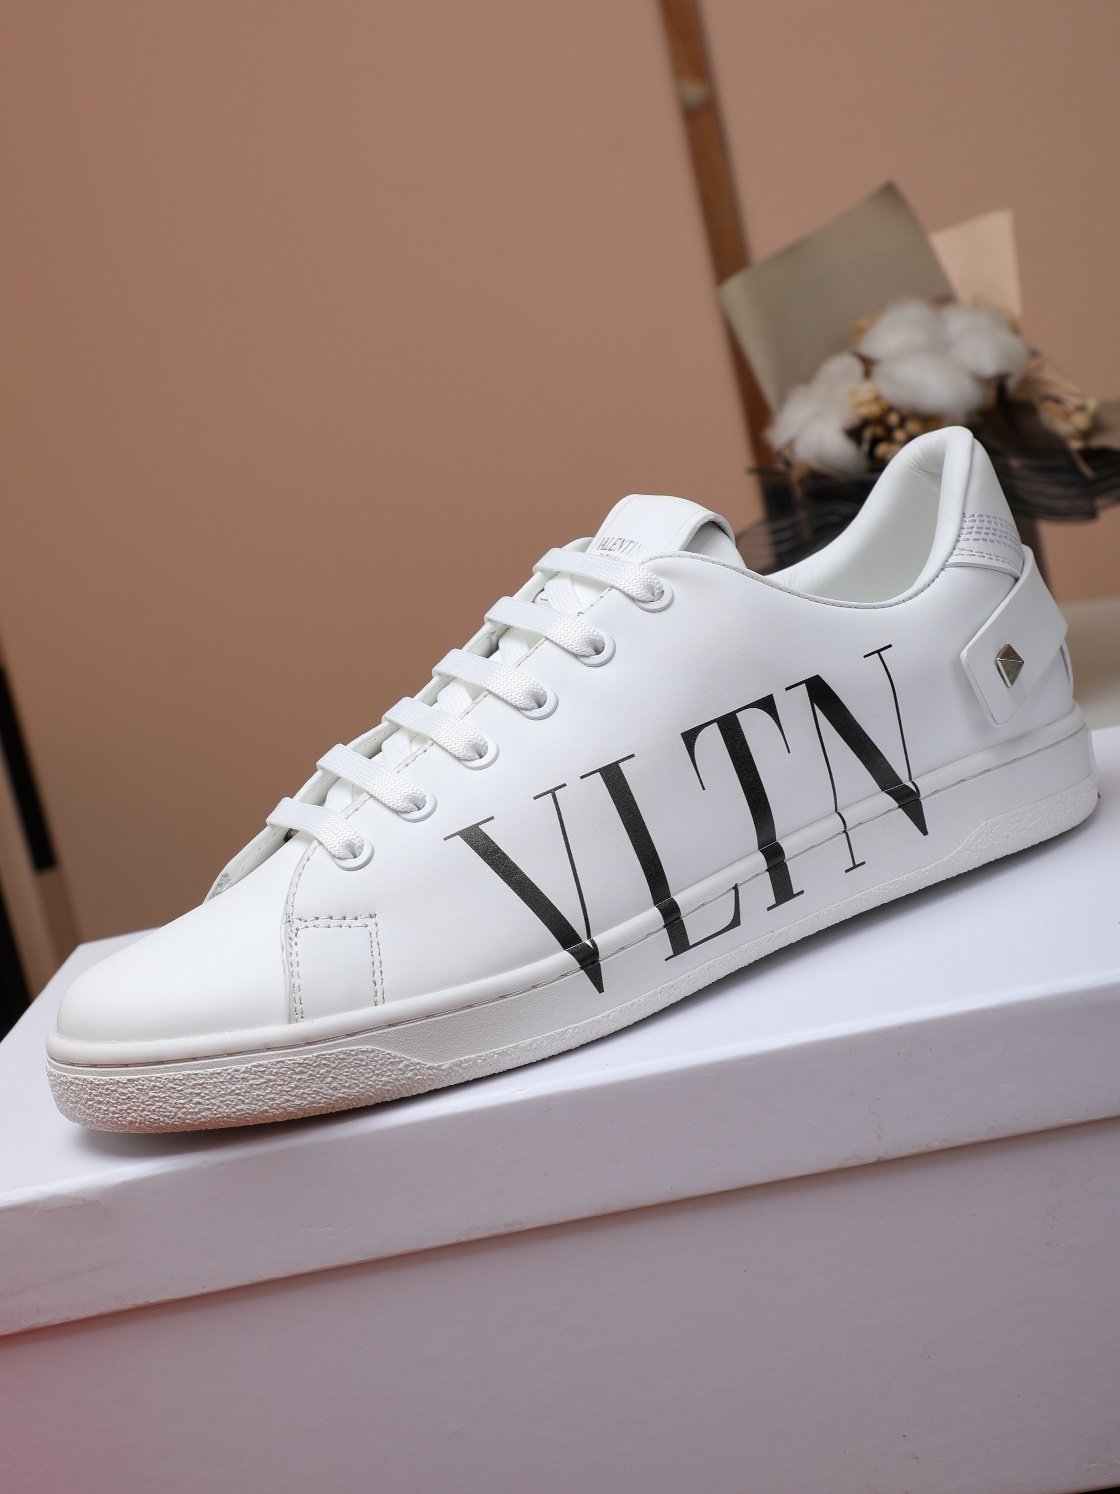 Valentino Woman's Men's 2020 New Fashion Casual Shoes Sneaker Sport   Running Shoes